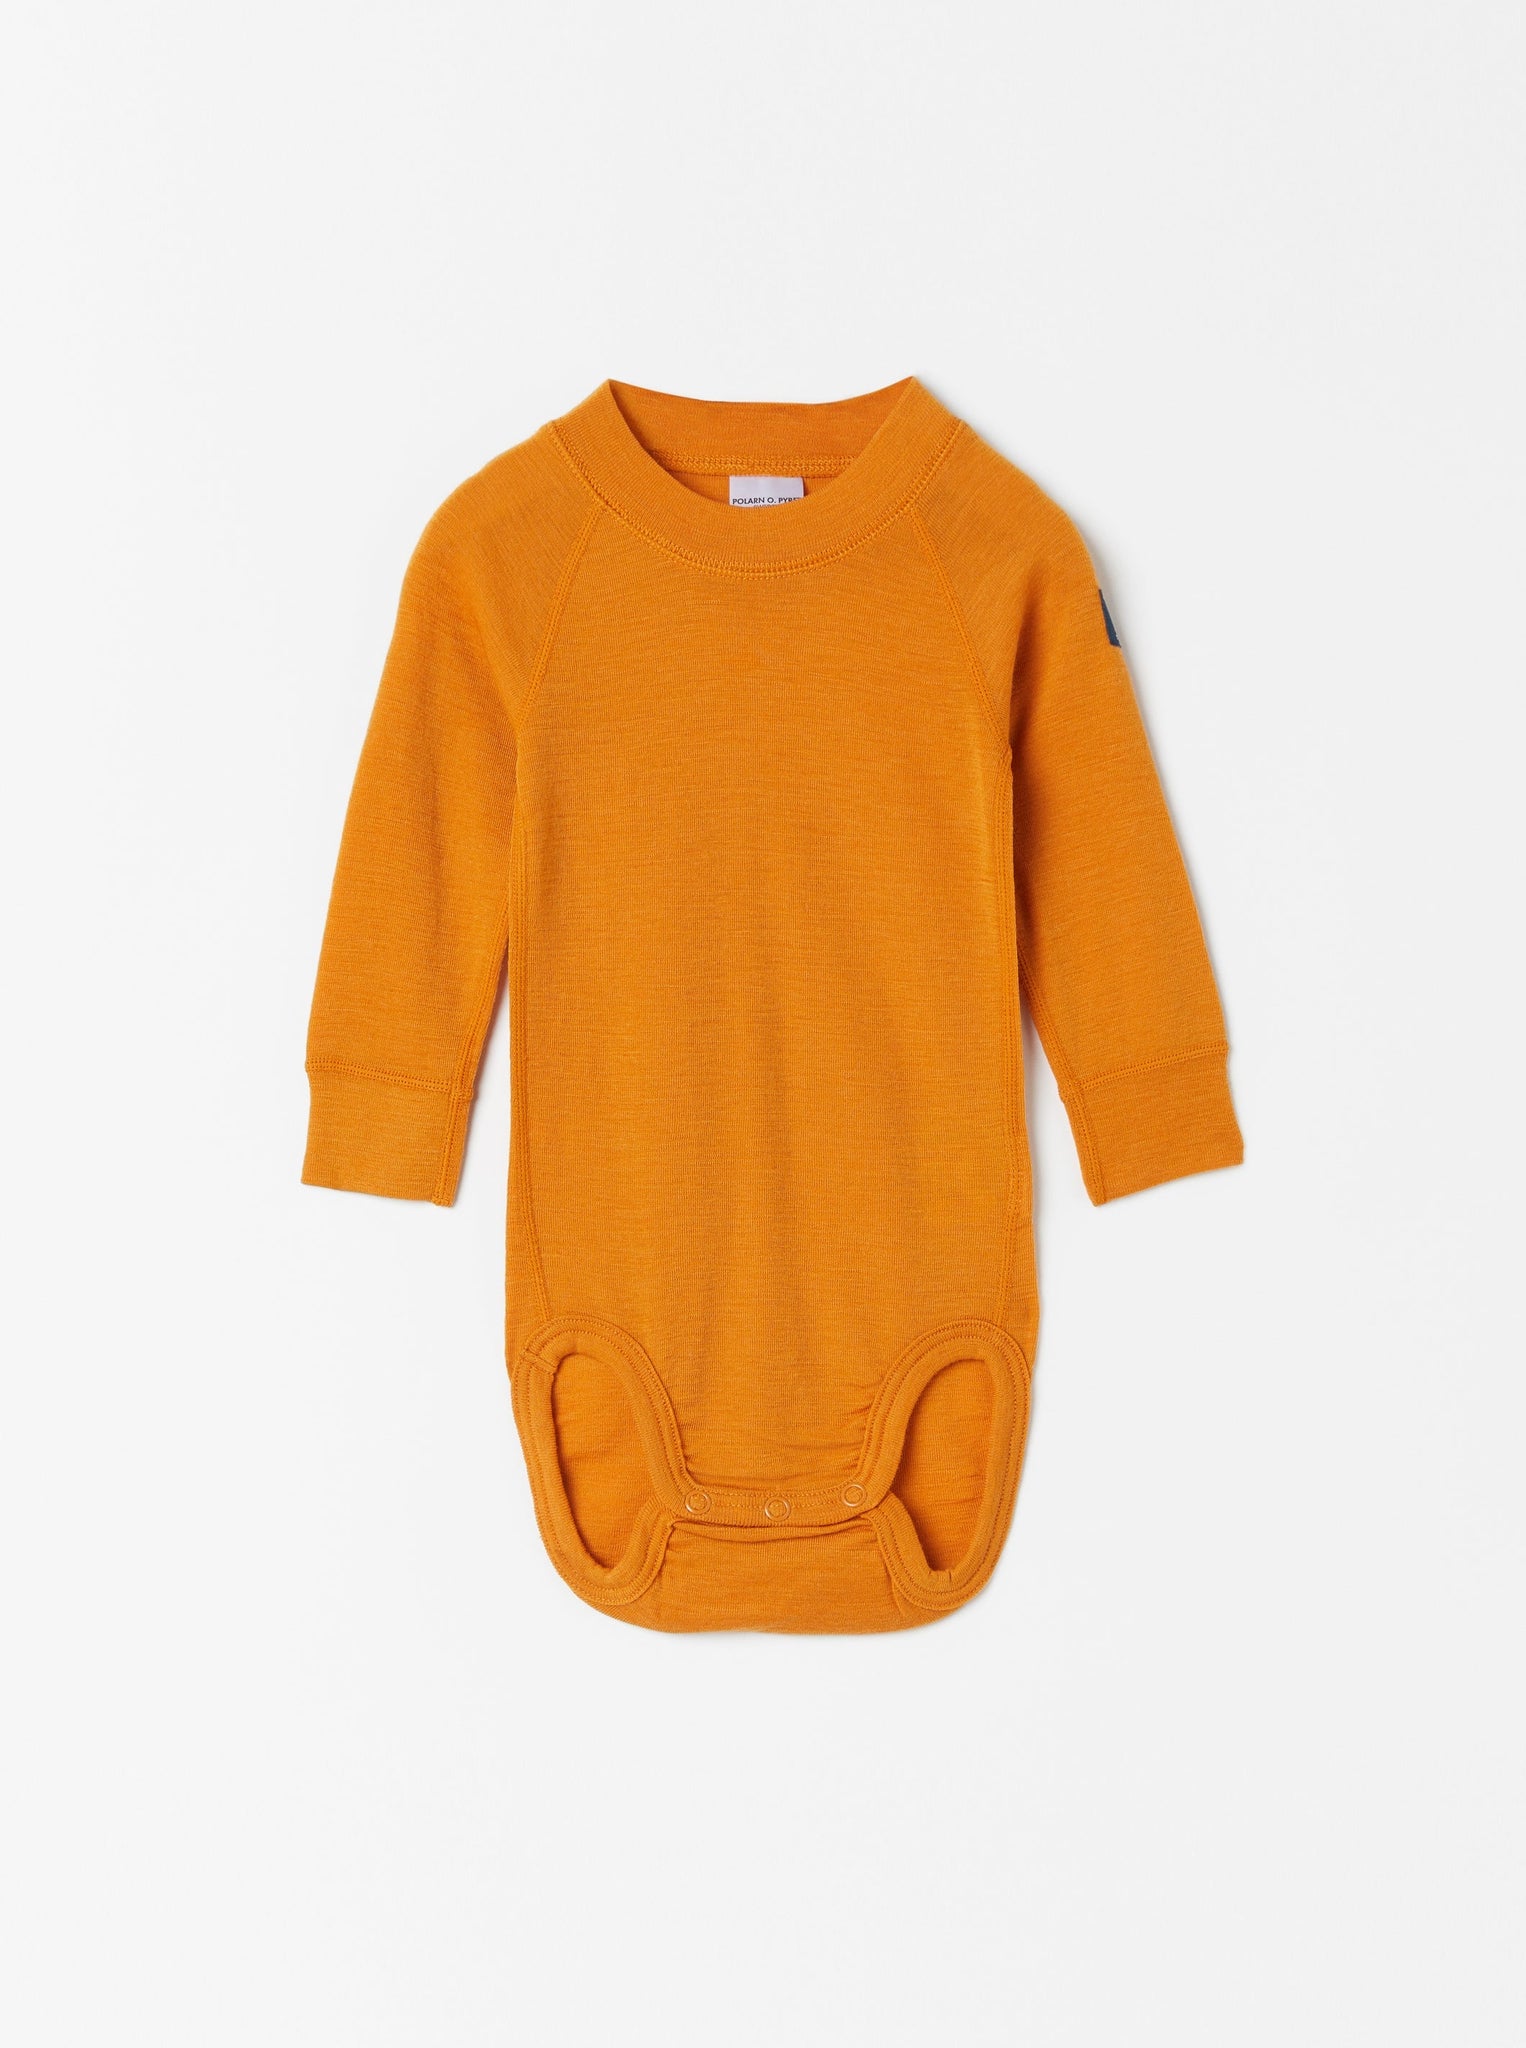 Yellow Thermal Merino Wool Babygrow from the Polarn O. Pyret kidswear collection. The best ethical kids outerwear.